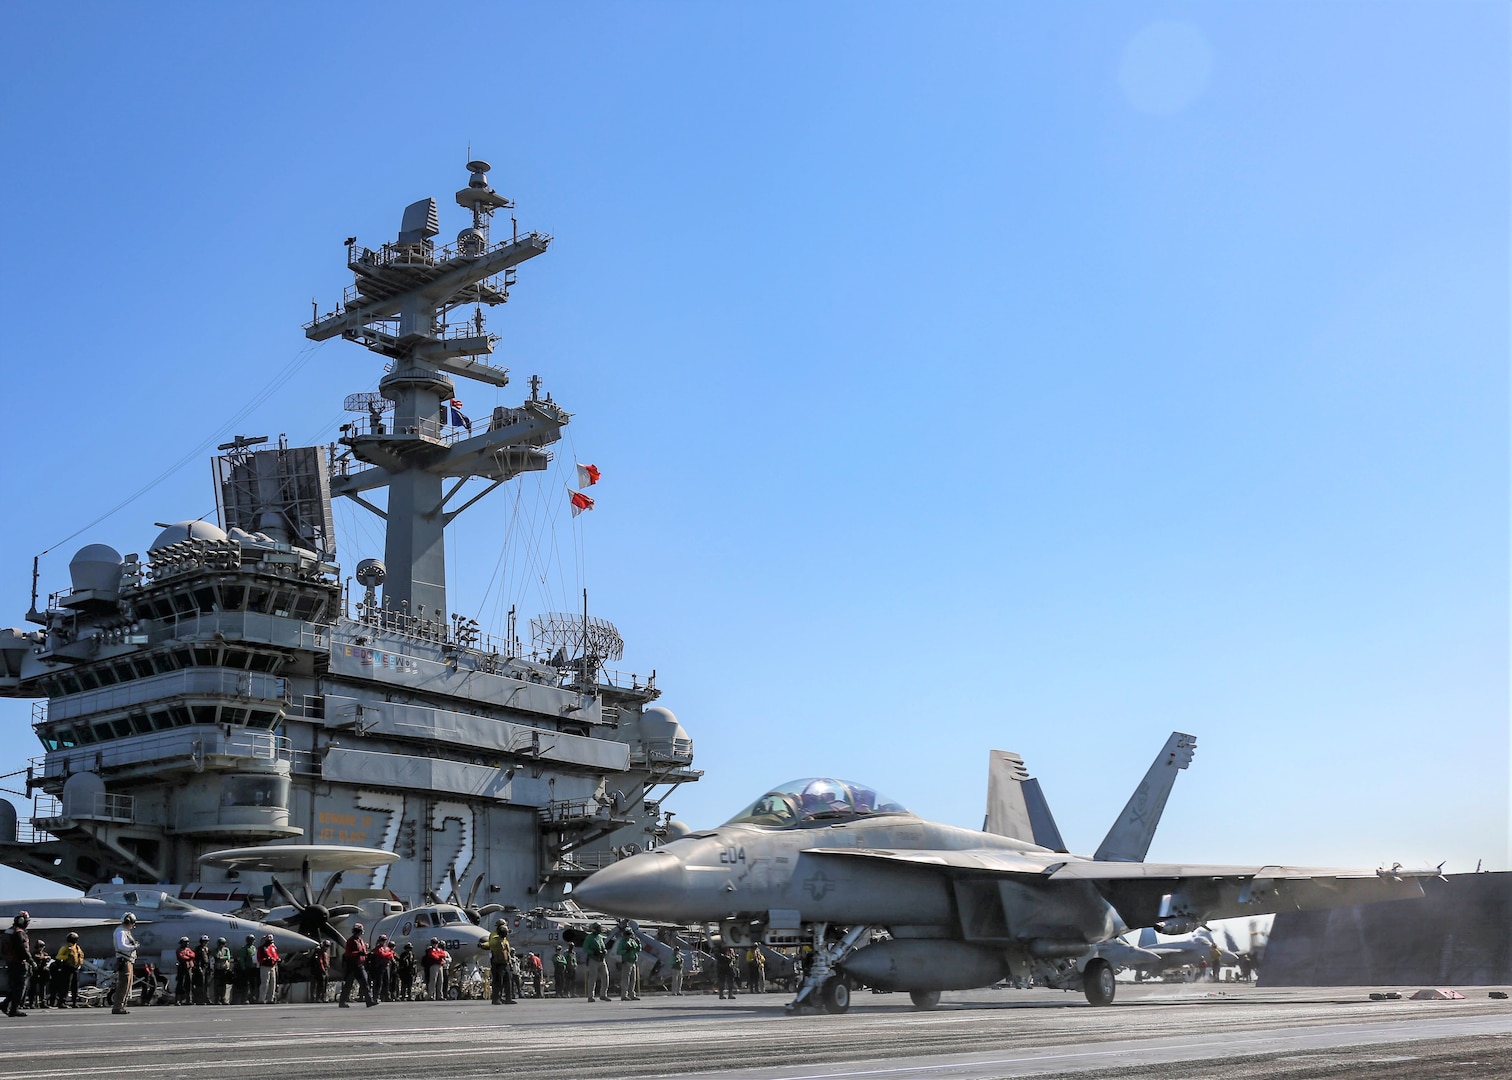 An F/A-18F Super Hornet attached to the "Jolly Rogers" of Strike Fighter Squadron (VFA) 103 launches from the flight deck of the aircraft carrier USS Abraham Lincoln (CVN 72). Abraham Lincoln Carrier Strike Group is deployed to the U.S. 5th Fleet area of operations in support of naval operations to ensure maritime stability and security in the Central Region, connecting the Mediterranean and the Pacific through the western Indian Ocean and three strategic choke points. With Abraham Lincoln as the flagship, deployed strike group assets include staffs, ships and aircraft of Carrier Strike Group 12 (CSG 12), Destroyer Squadron 2 (DESRON 2), USS Leyte Gulf (CG 55) and Carrier Air Wing 7 (CVW 7). (U.S. Navy photo by Mass Communication Specialist 3rd Class Jeremiah Bartelt/Released)